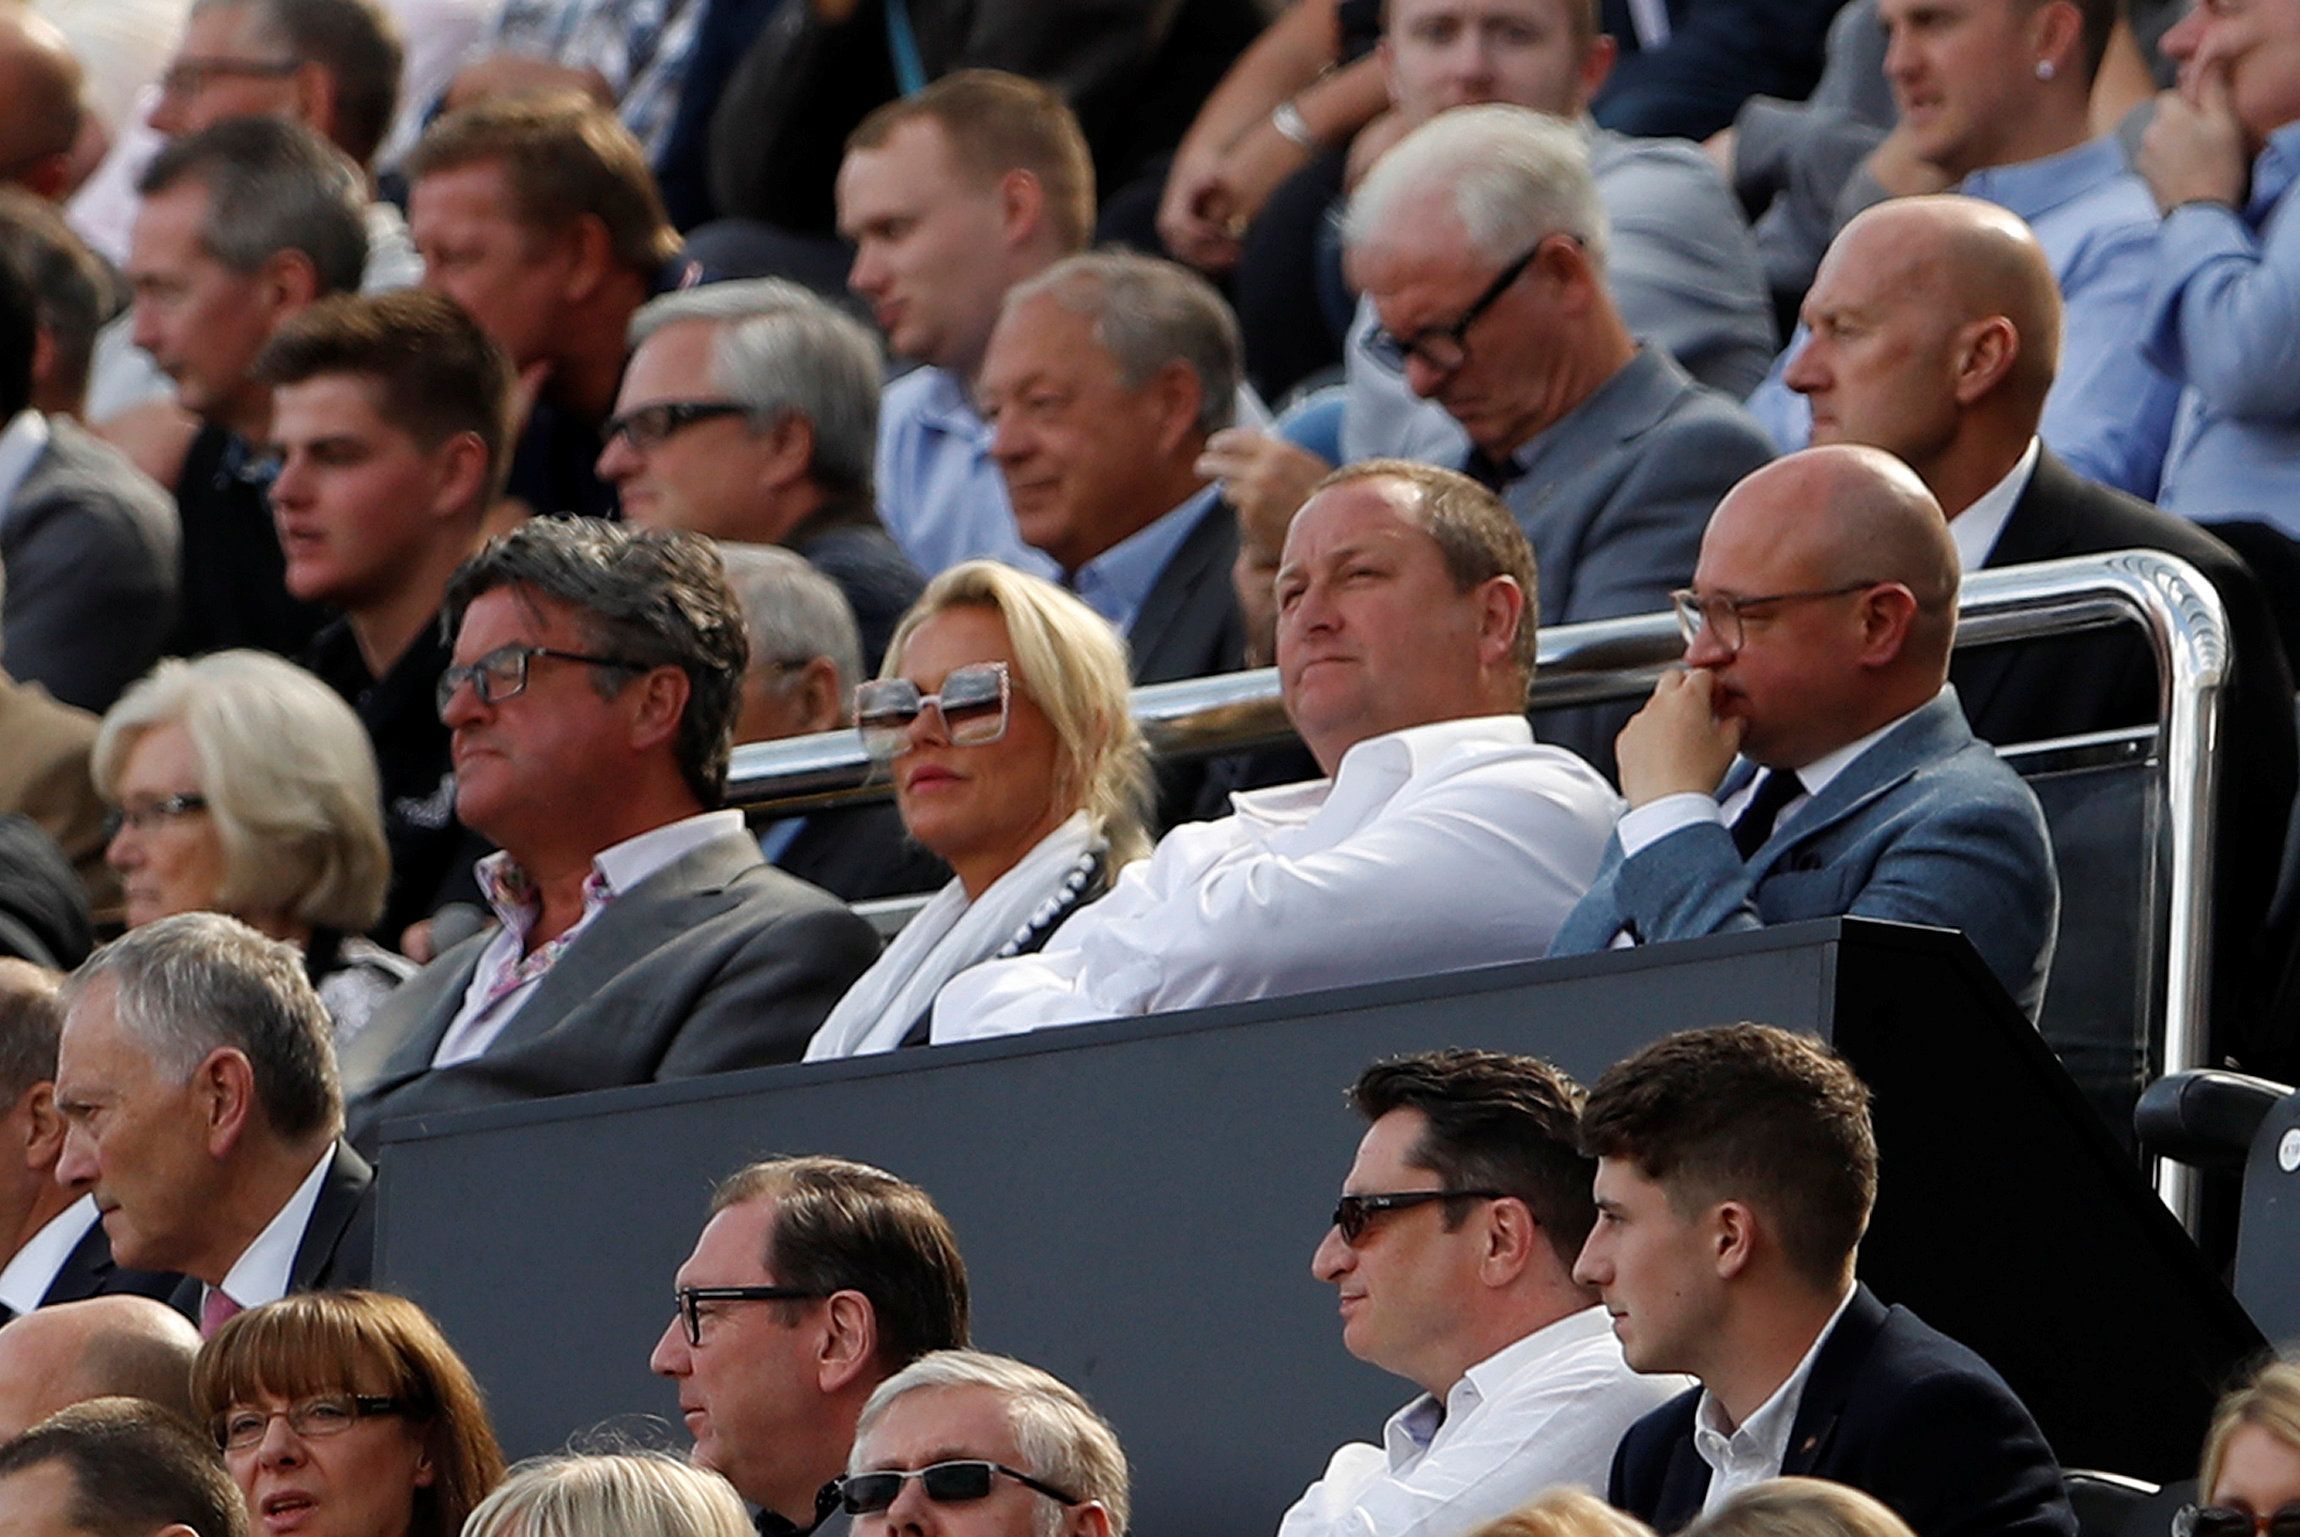 Football Soccer - Premier League - Newcastle United vs Tottenham Hotspur - Newcastle, Britain - August 13, 2017   Newcastle United owner Mike Ashley (C) looks on from the stands   Action Images via Reuters/Lee Smith  EDITORIAL USE ONLY. No use with unauthorized audio, video, data, fixture lists, club/league logos or 